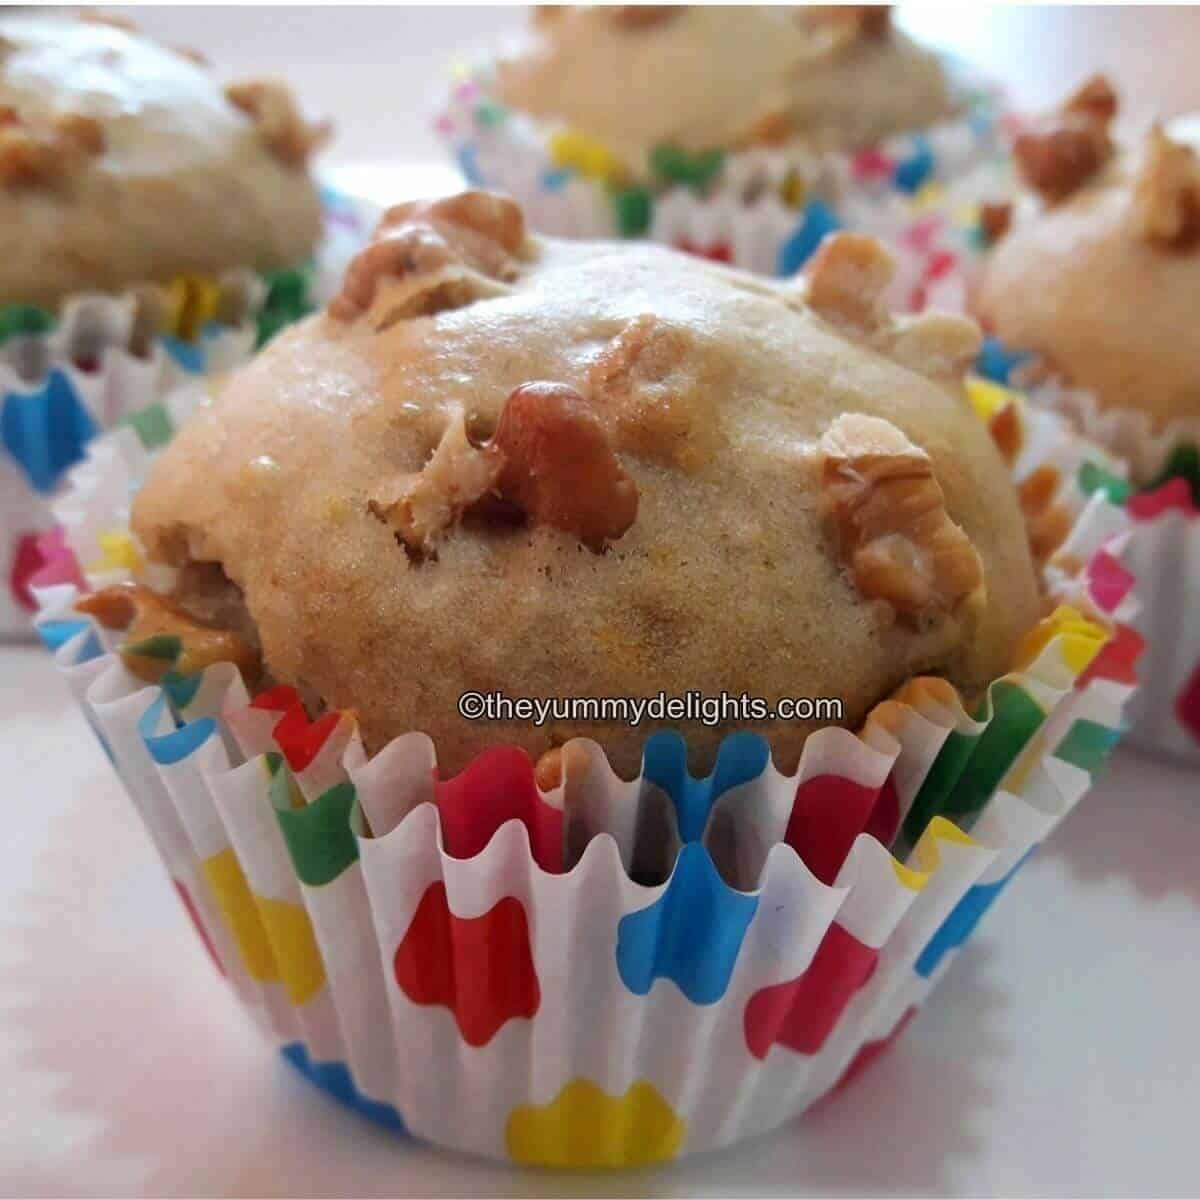 banana and nut muffins 1